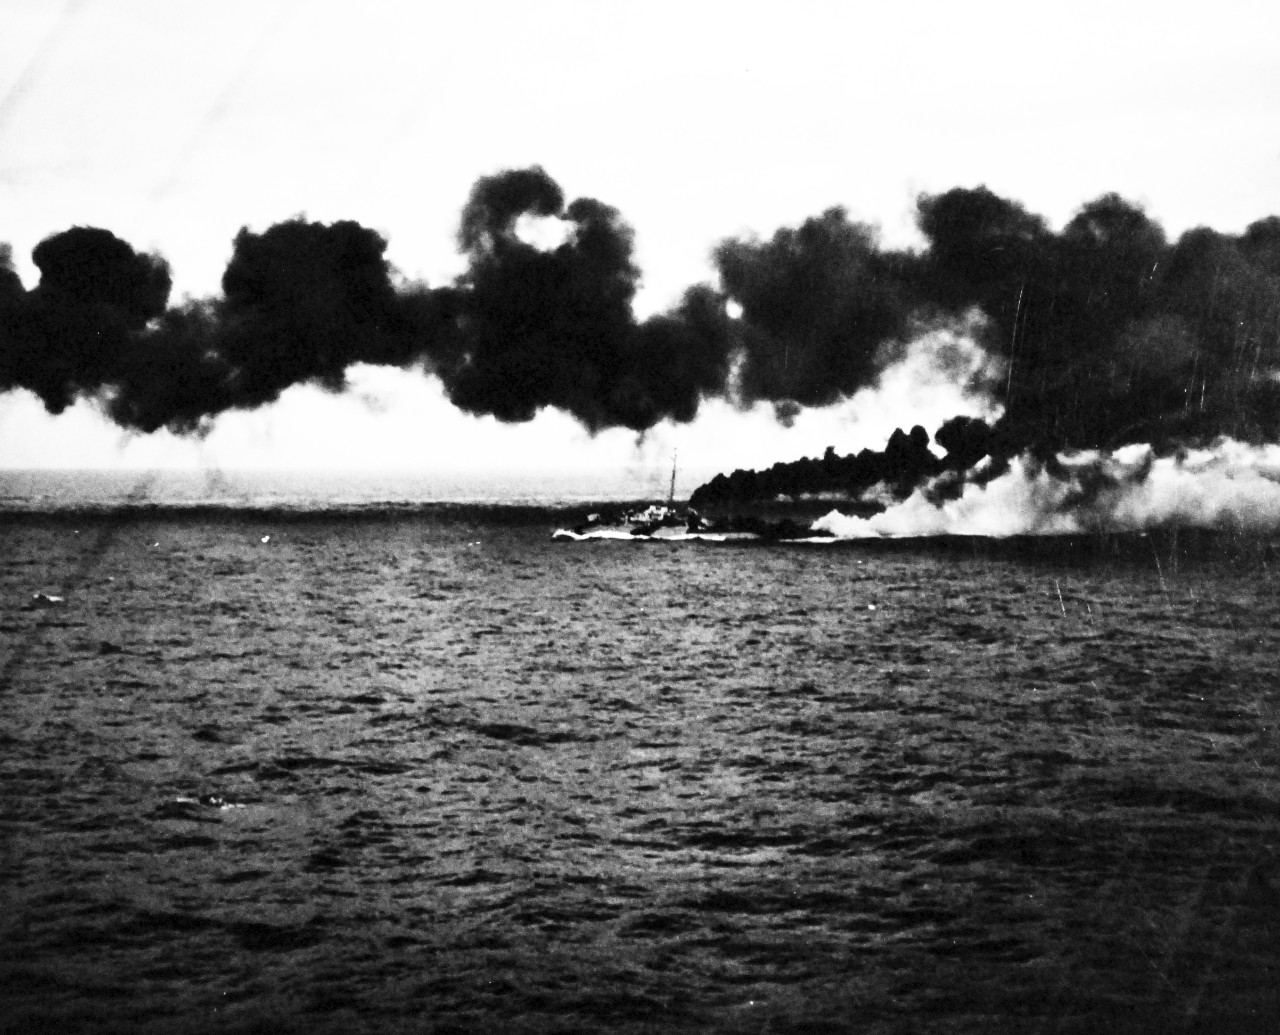 80-G-287459:   Battle off Samar, October 25, 1944.     Smoke laid by destroyers and destroyer escorts of US fleet provides screen from Japanese fleet during Battle of Leyte Gulf.   As seen from USS Kitkun Bay (CVE-71).  Shown is USS Dennis (DE-405).  Official U.S. Navy Photograph, now in the collections of the National Archives.  (2014/5/15).  